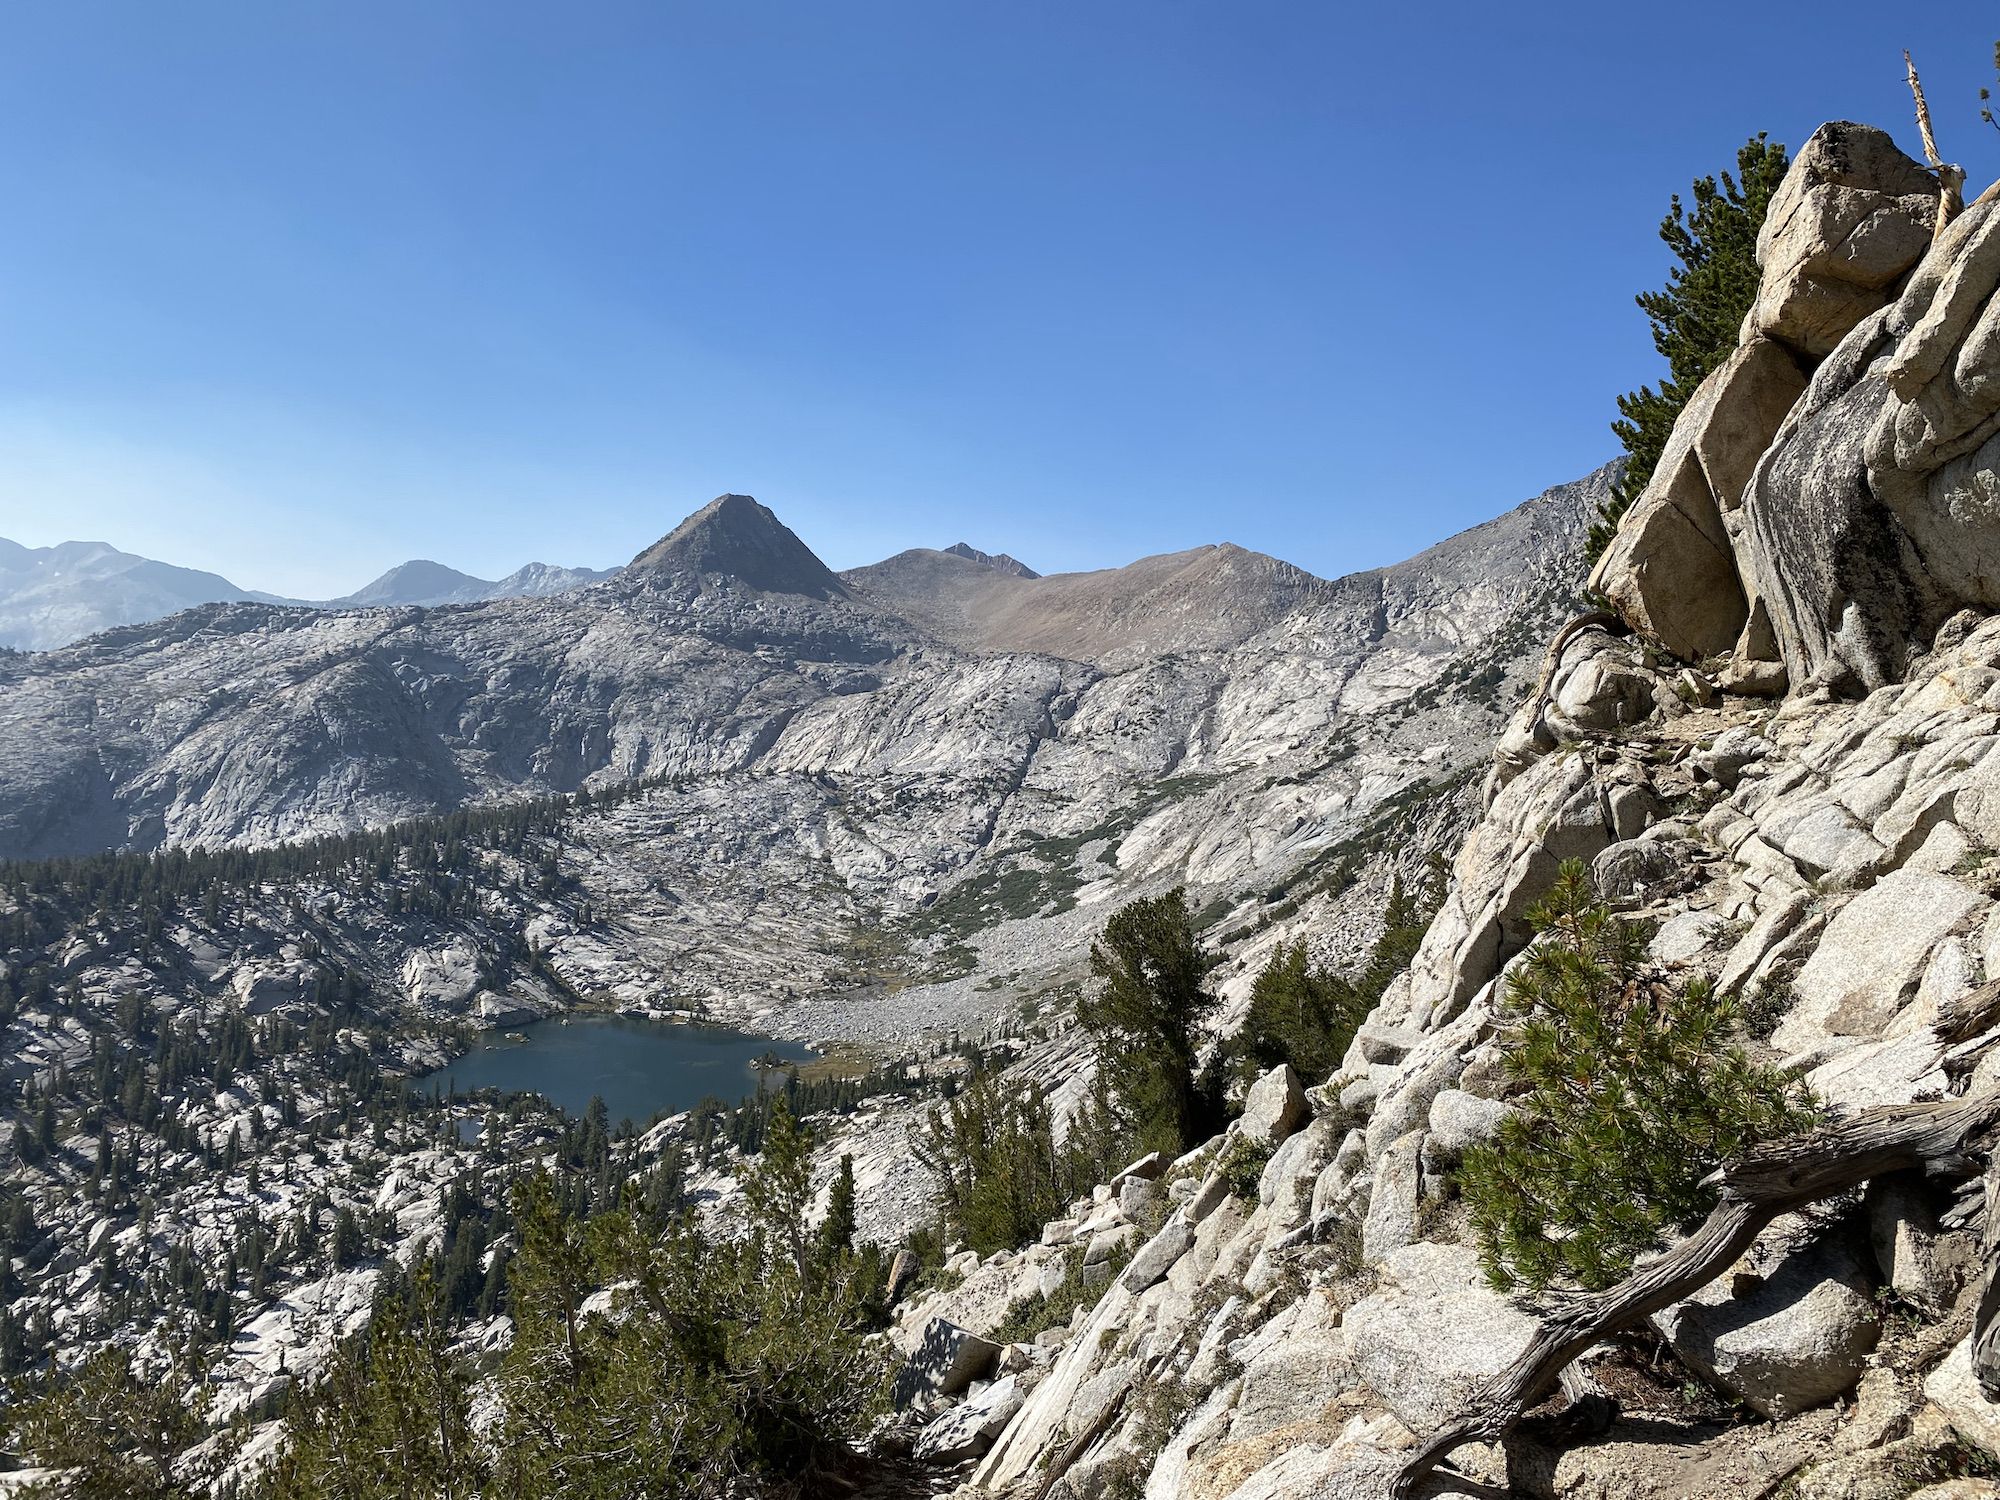 A lake in a bowl surrounded by granite peaks.